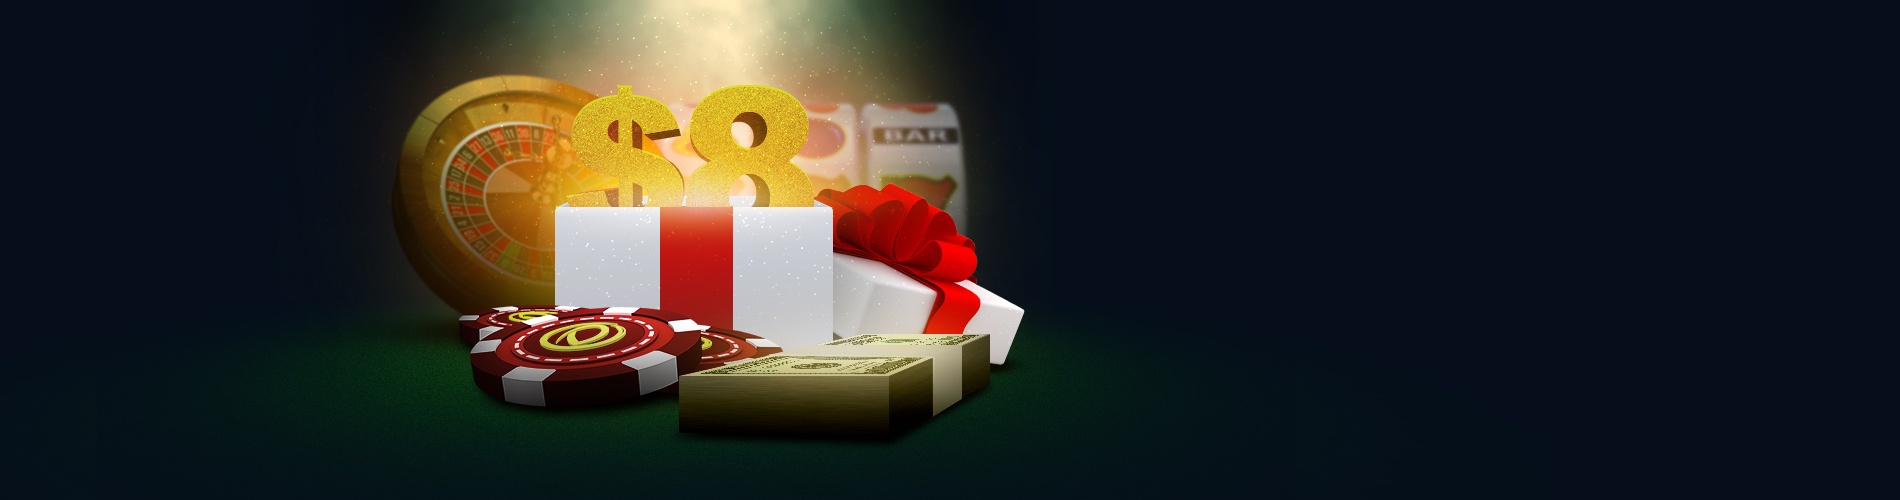 Online Poker Promotion: New Player Package